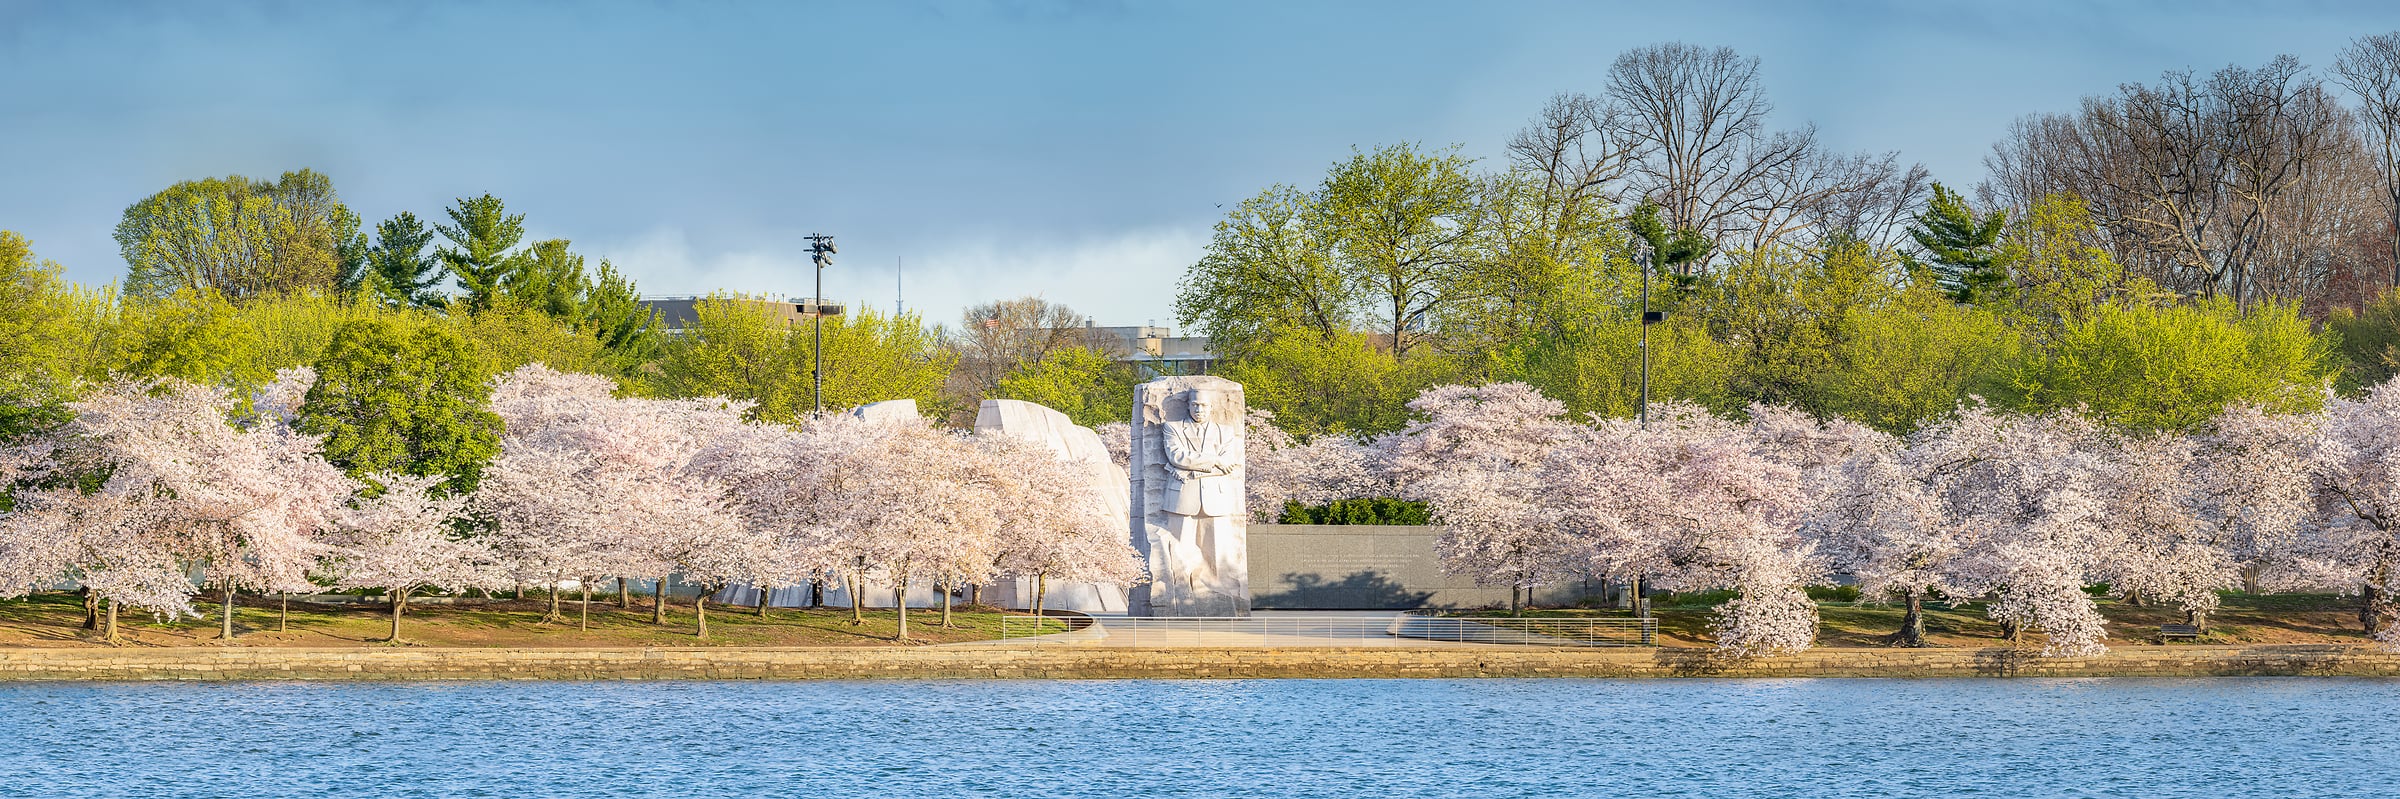 259 megapixels! A very high resolution, large-format VAST photo print of the Martin Luther King, Jr. Memorial in Washington, D.C. with cherry blossoms and the tidal basin in the foreground; photograph created by Tim Lo Monaco on the National Mall in Washington, D.C.